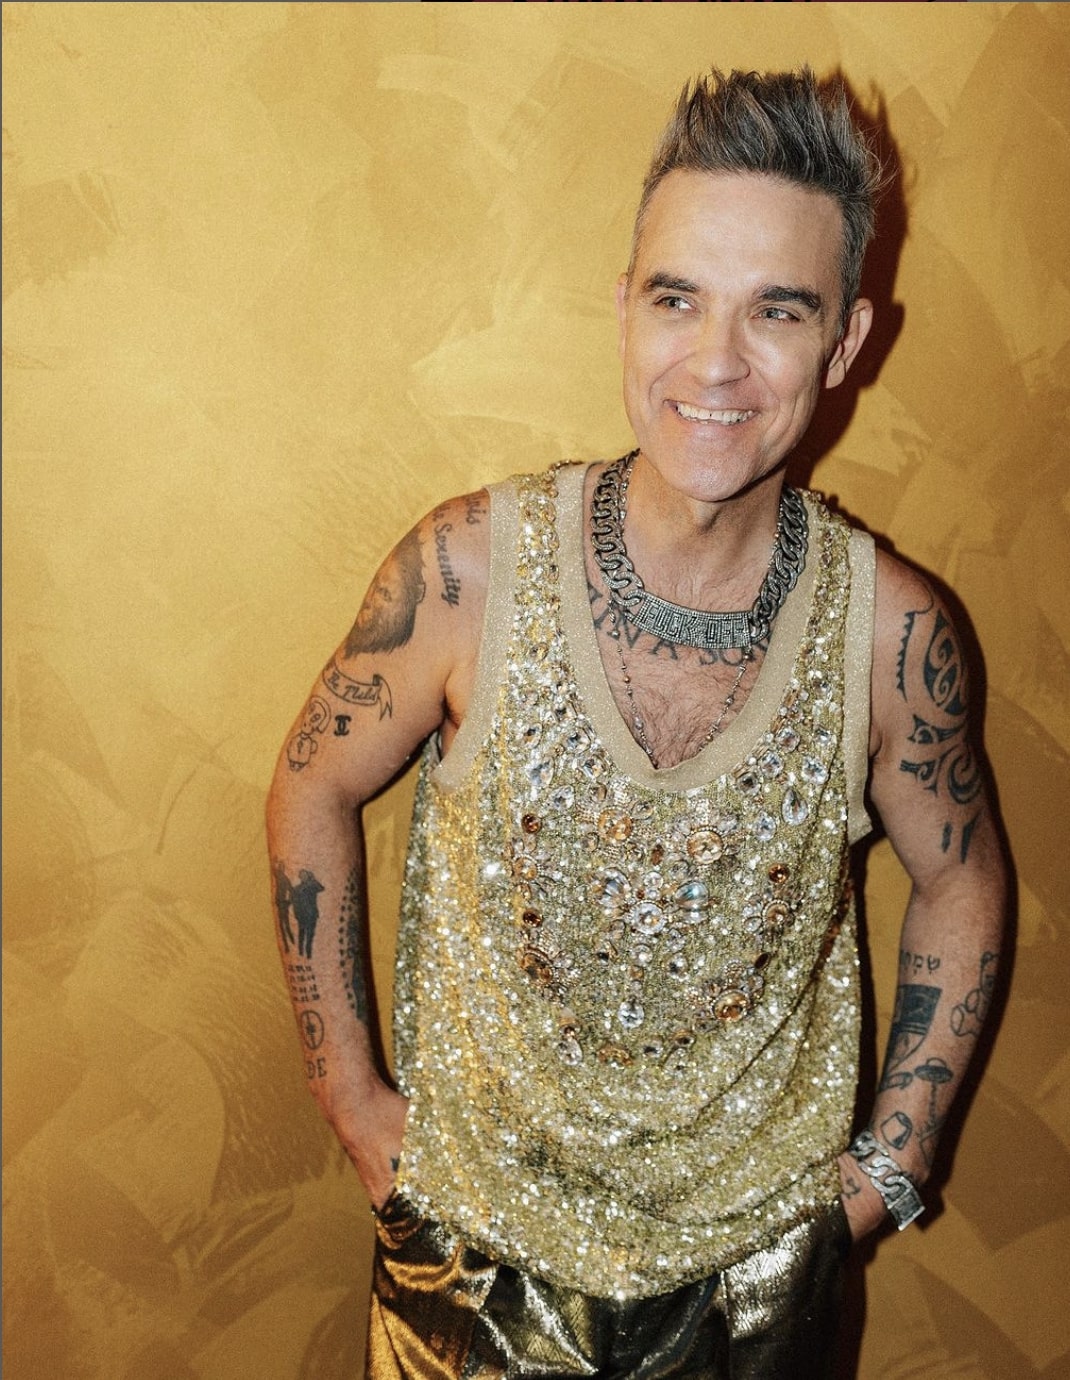 robbie-williams-shares-why-he-broke-up-with-spice-girl-geri-halliwell